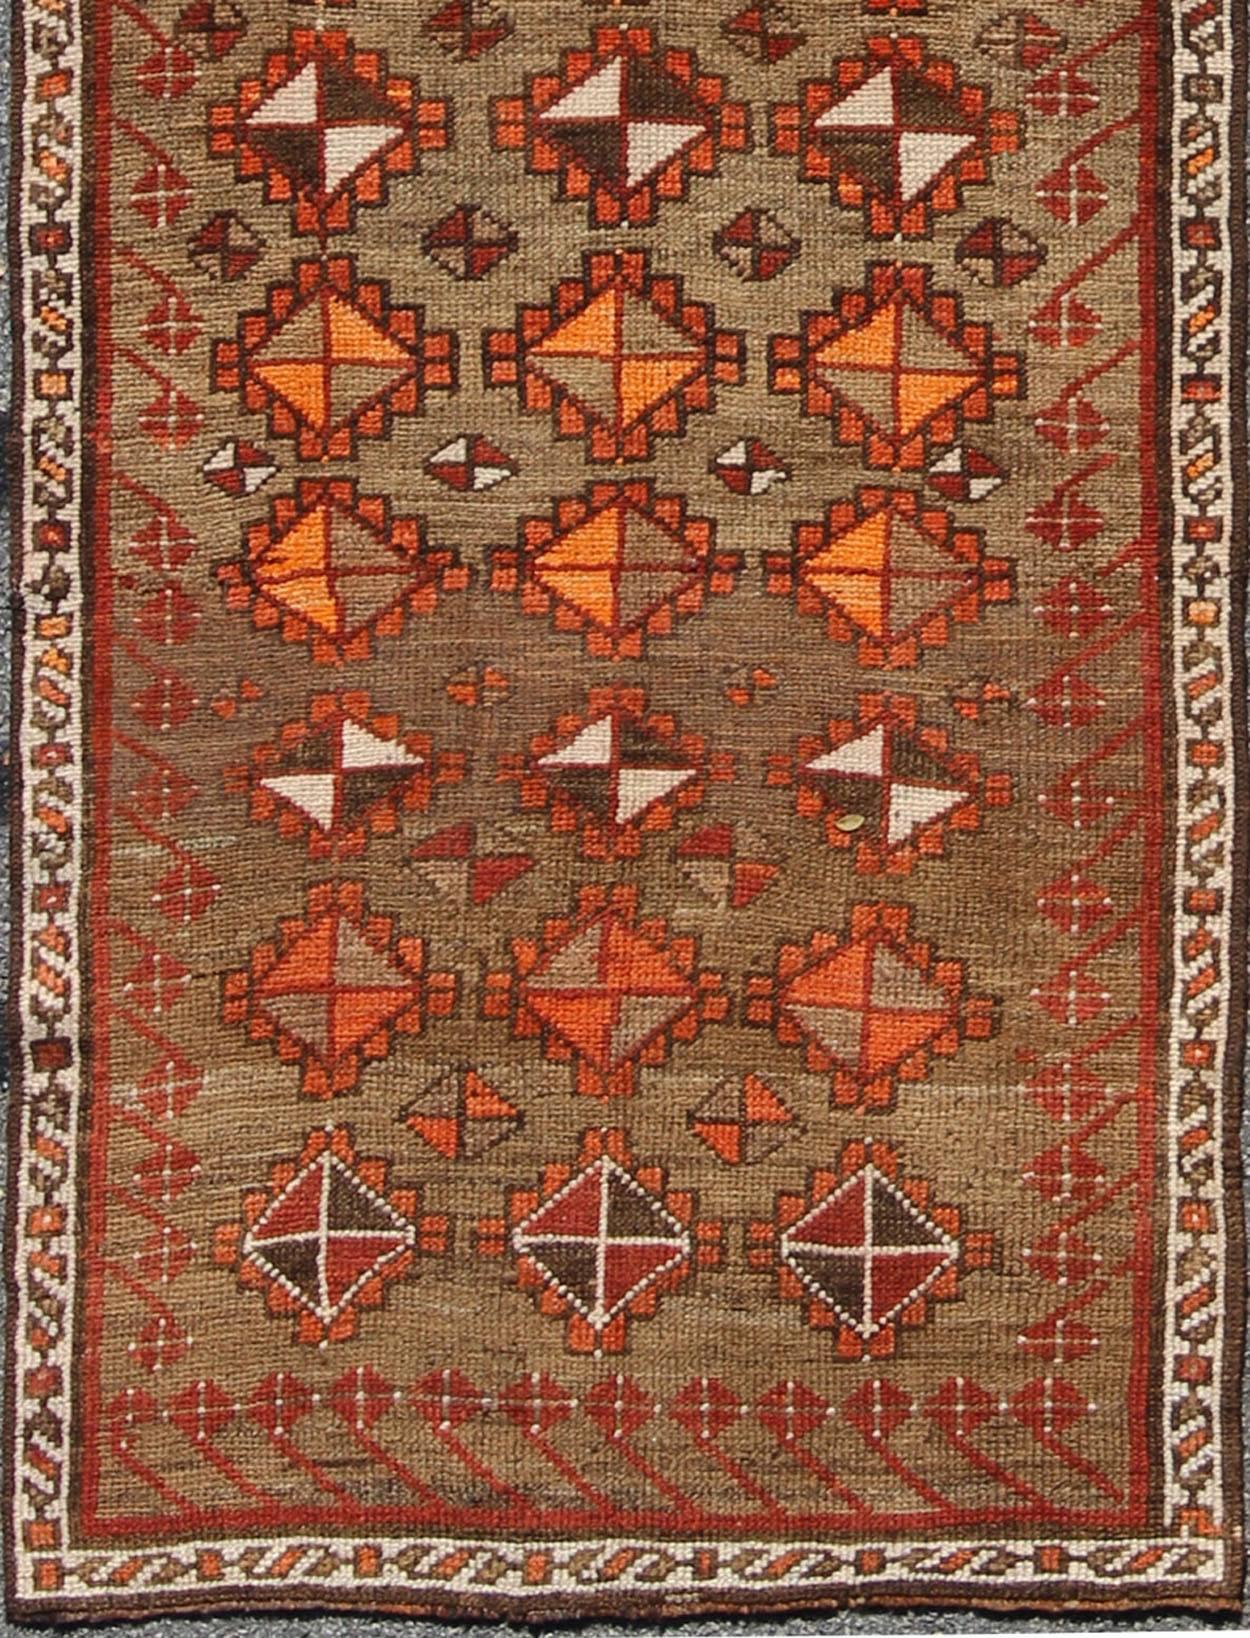 Antique Turkish Tribal Runner in green background and rusty red, orange/ Keivan Woven Arts rug/TU-TRS-4645. Turkish antique runner

This colorful Oushak runner contains tones of rust red, coral, taupe, orange, gray, beige, and brown. The stylized